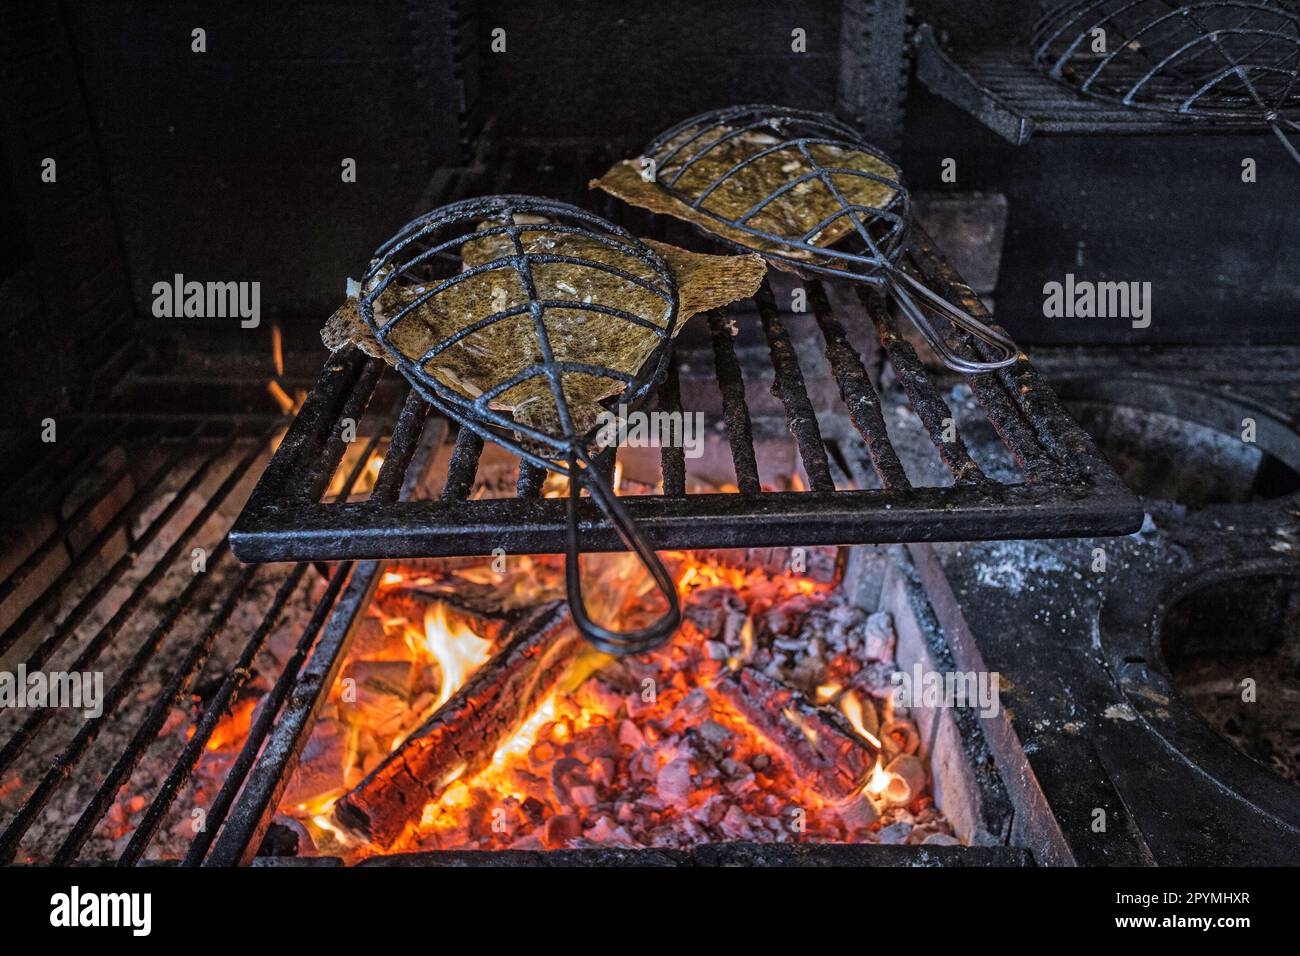 Cooking fish in iron cages over wood fire at Brat Restaurant in London, UK Stock Photo